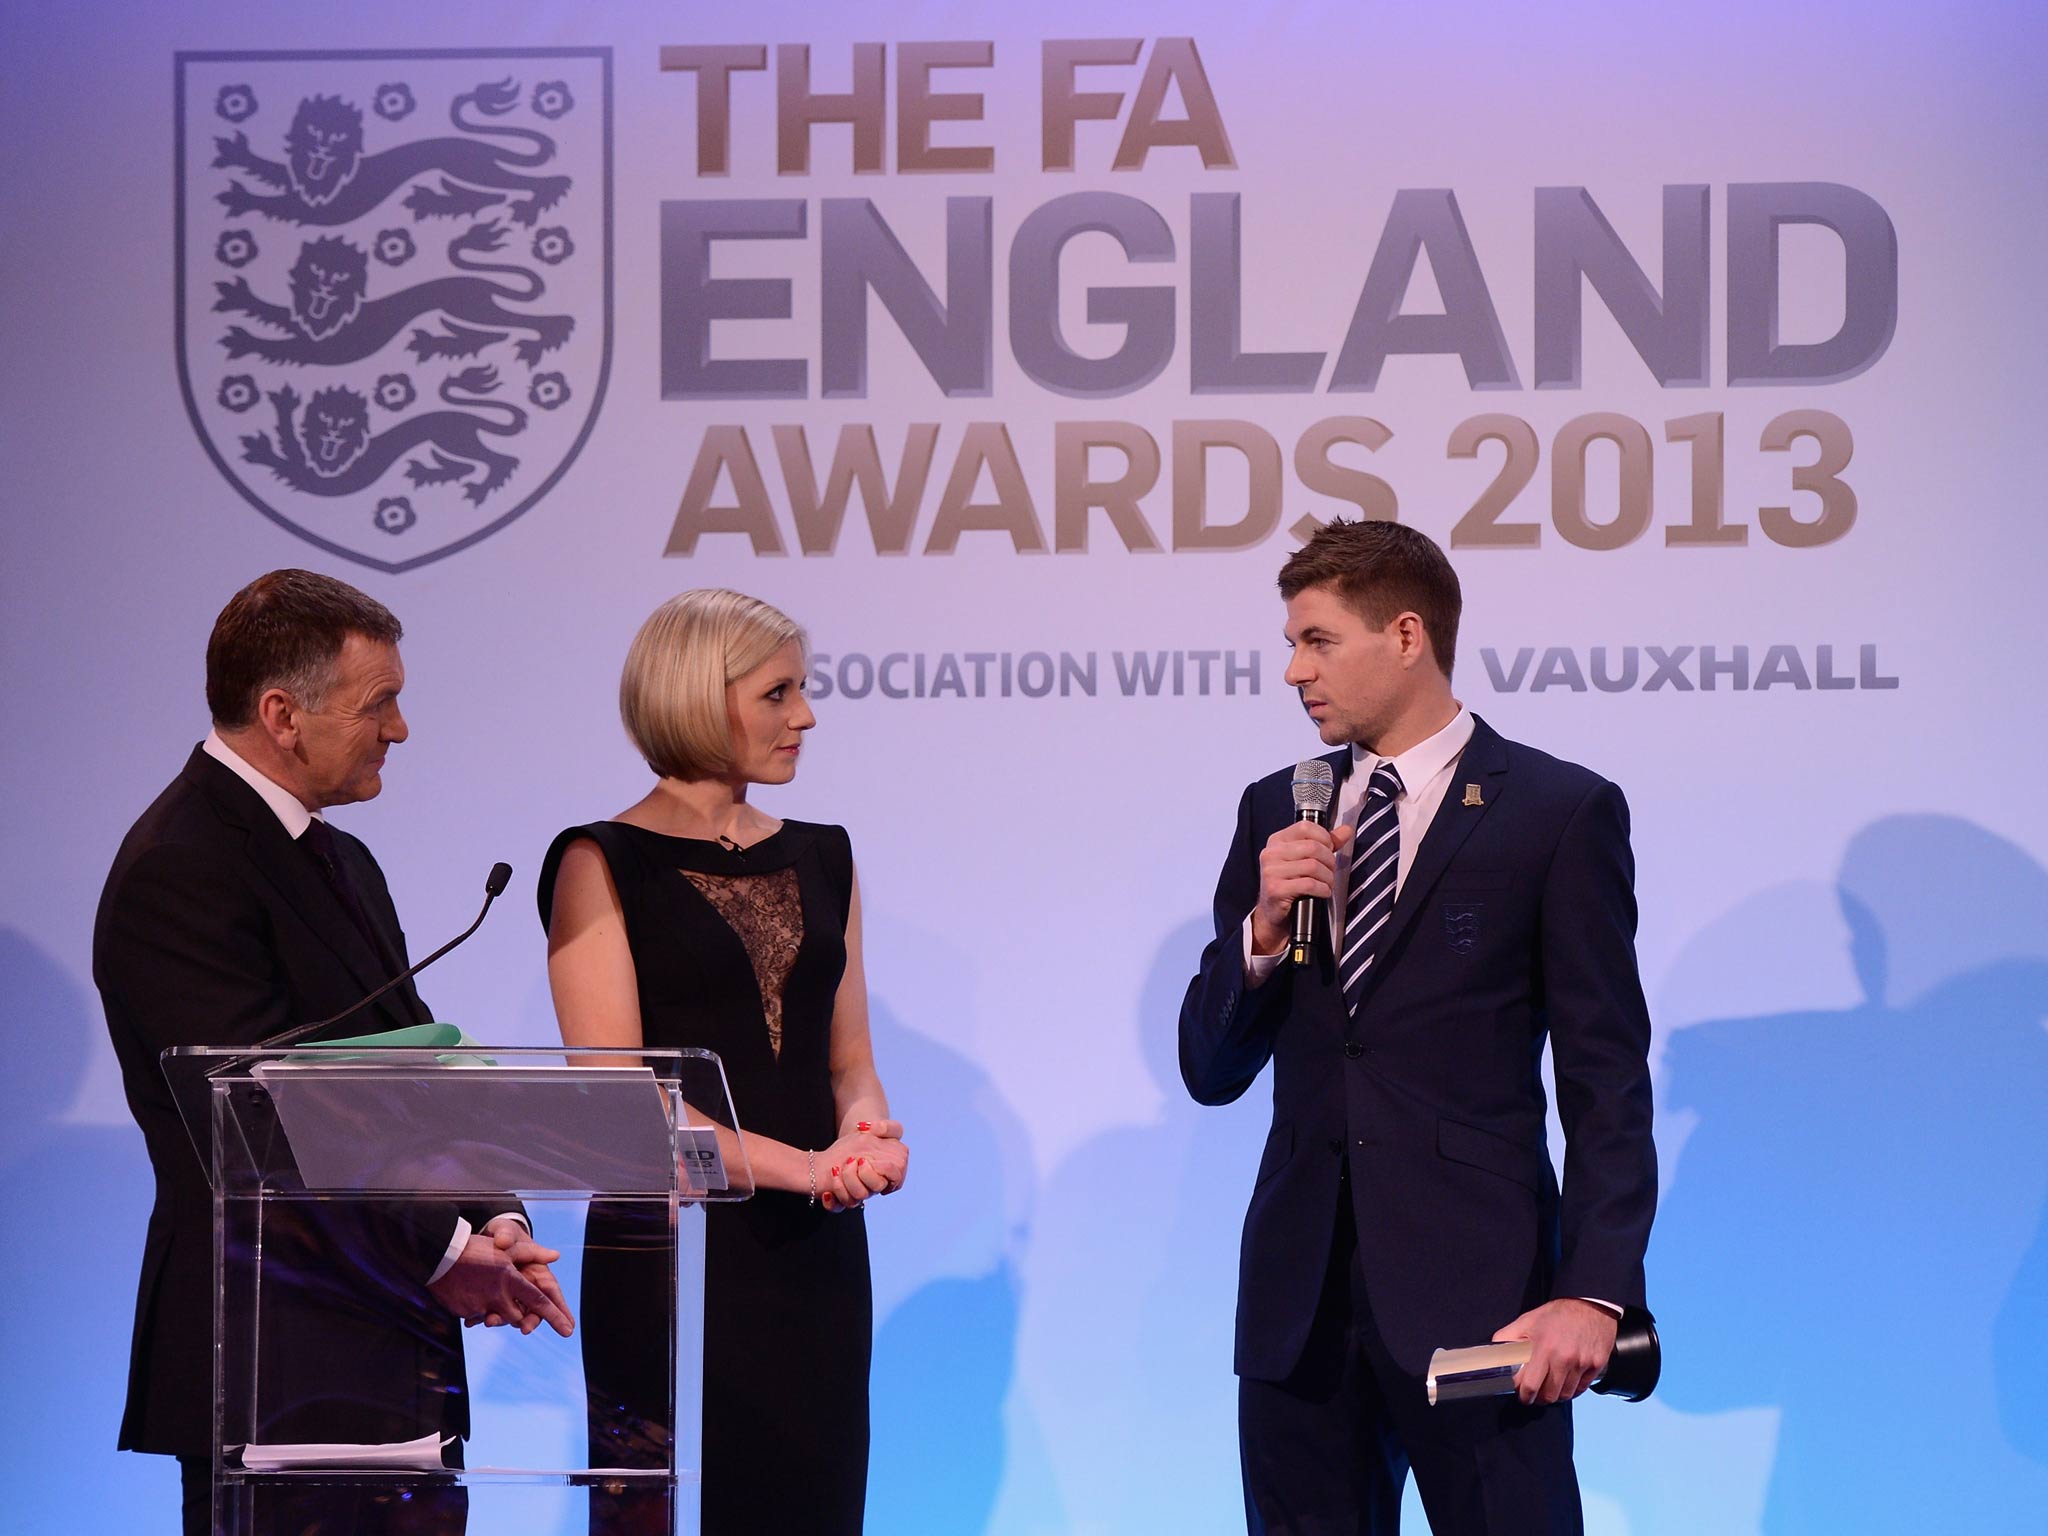 Steven Gerrard wins the England player of the year award